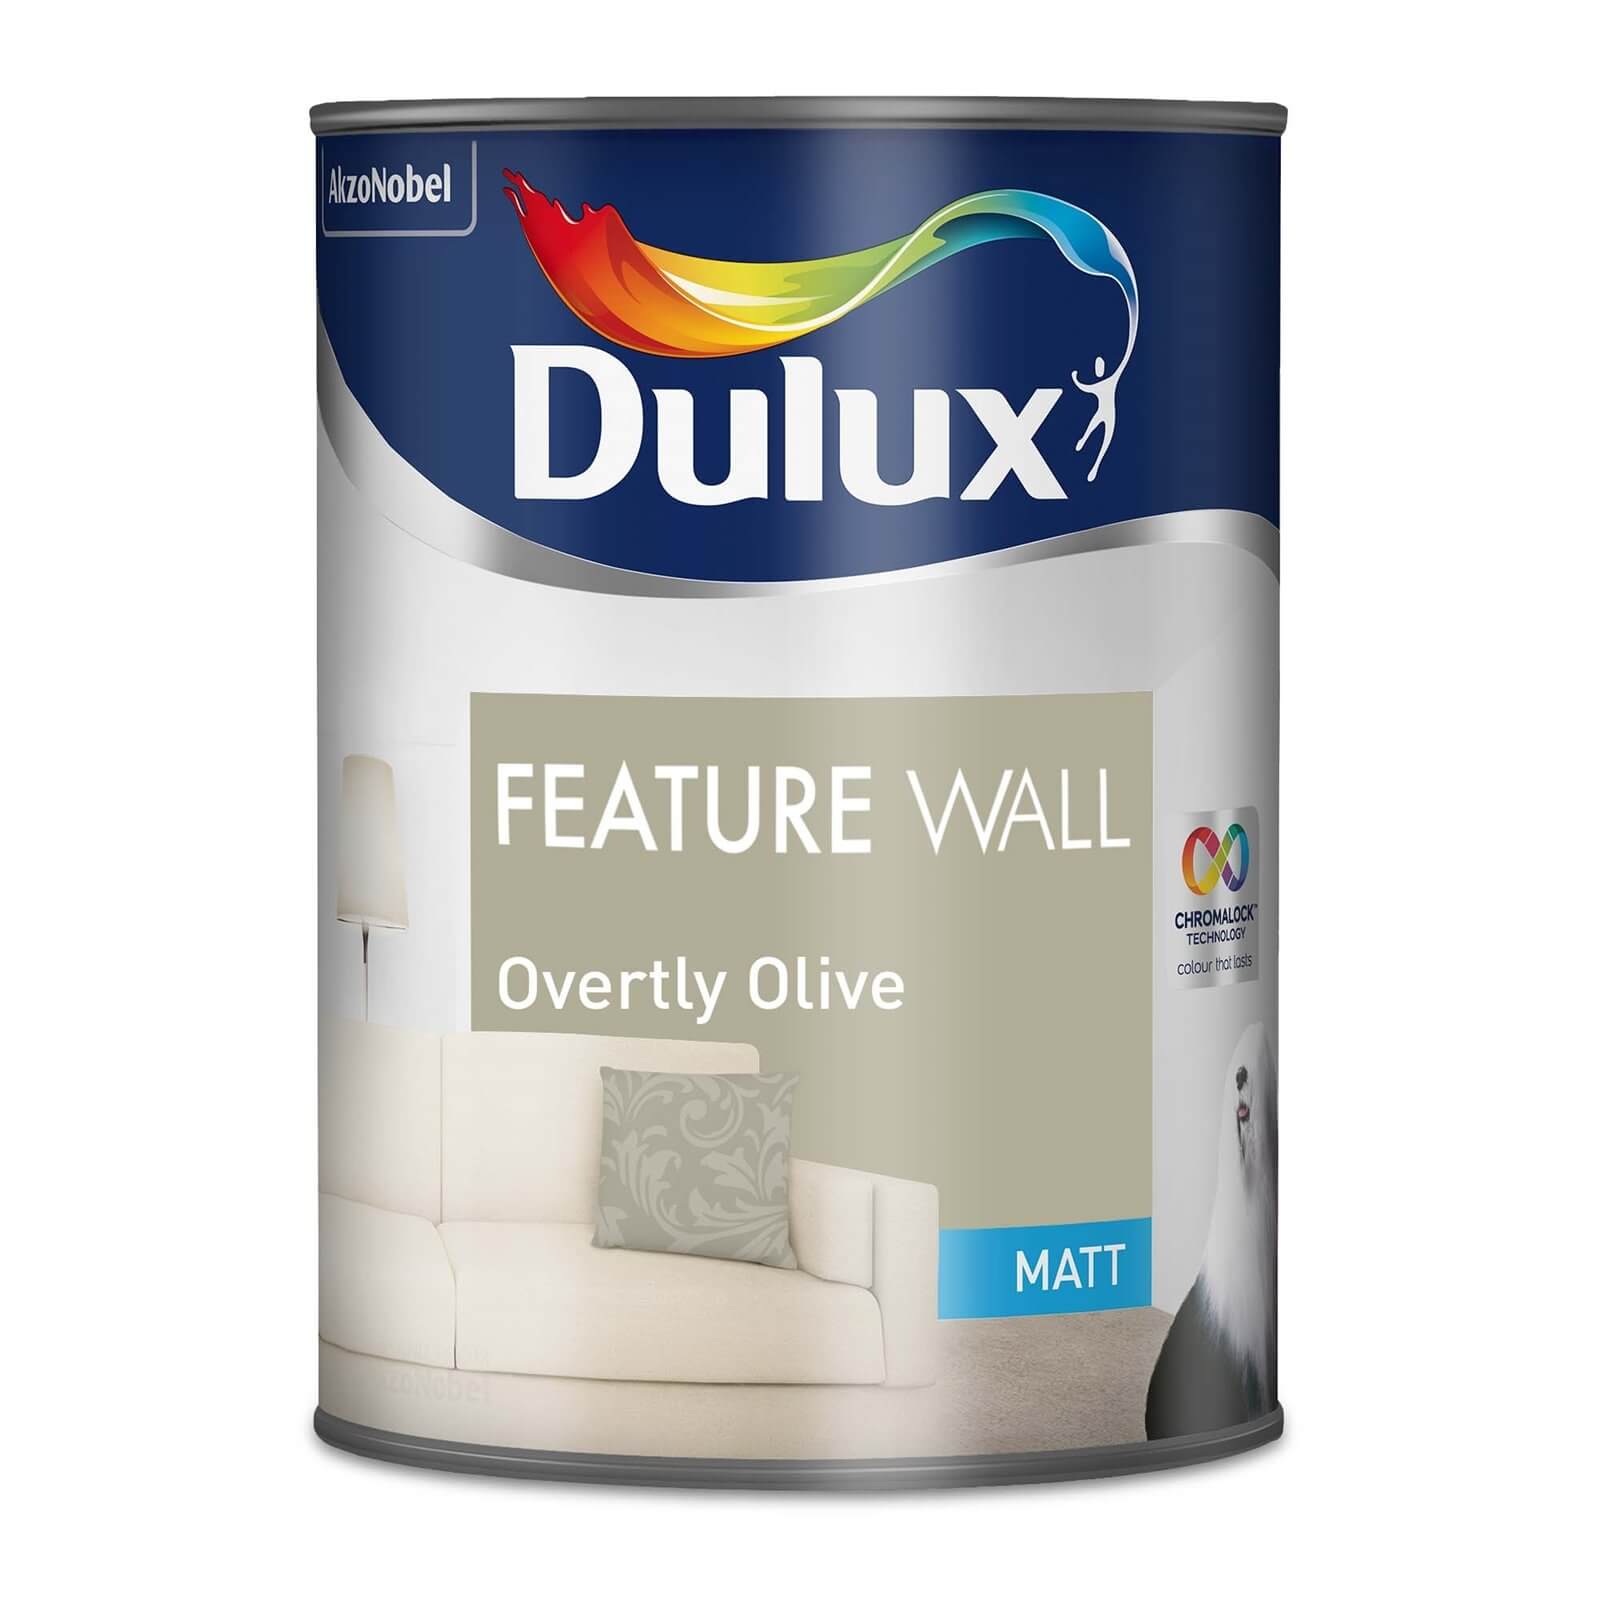 Dulux Feature Wall Overtly Olive - Matt Emulsion Paint - 1.25L